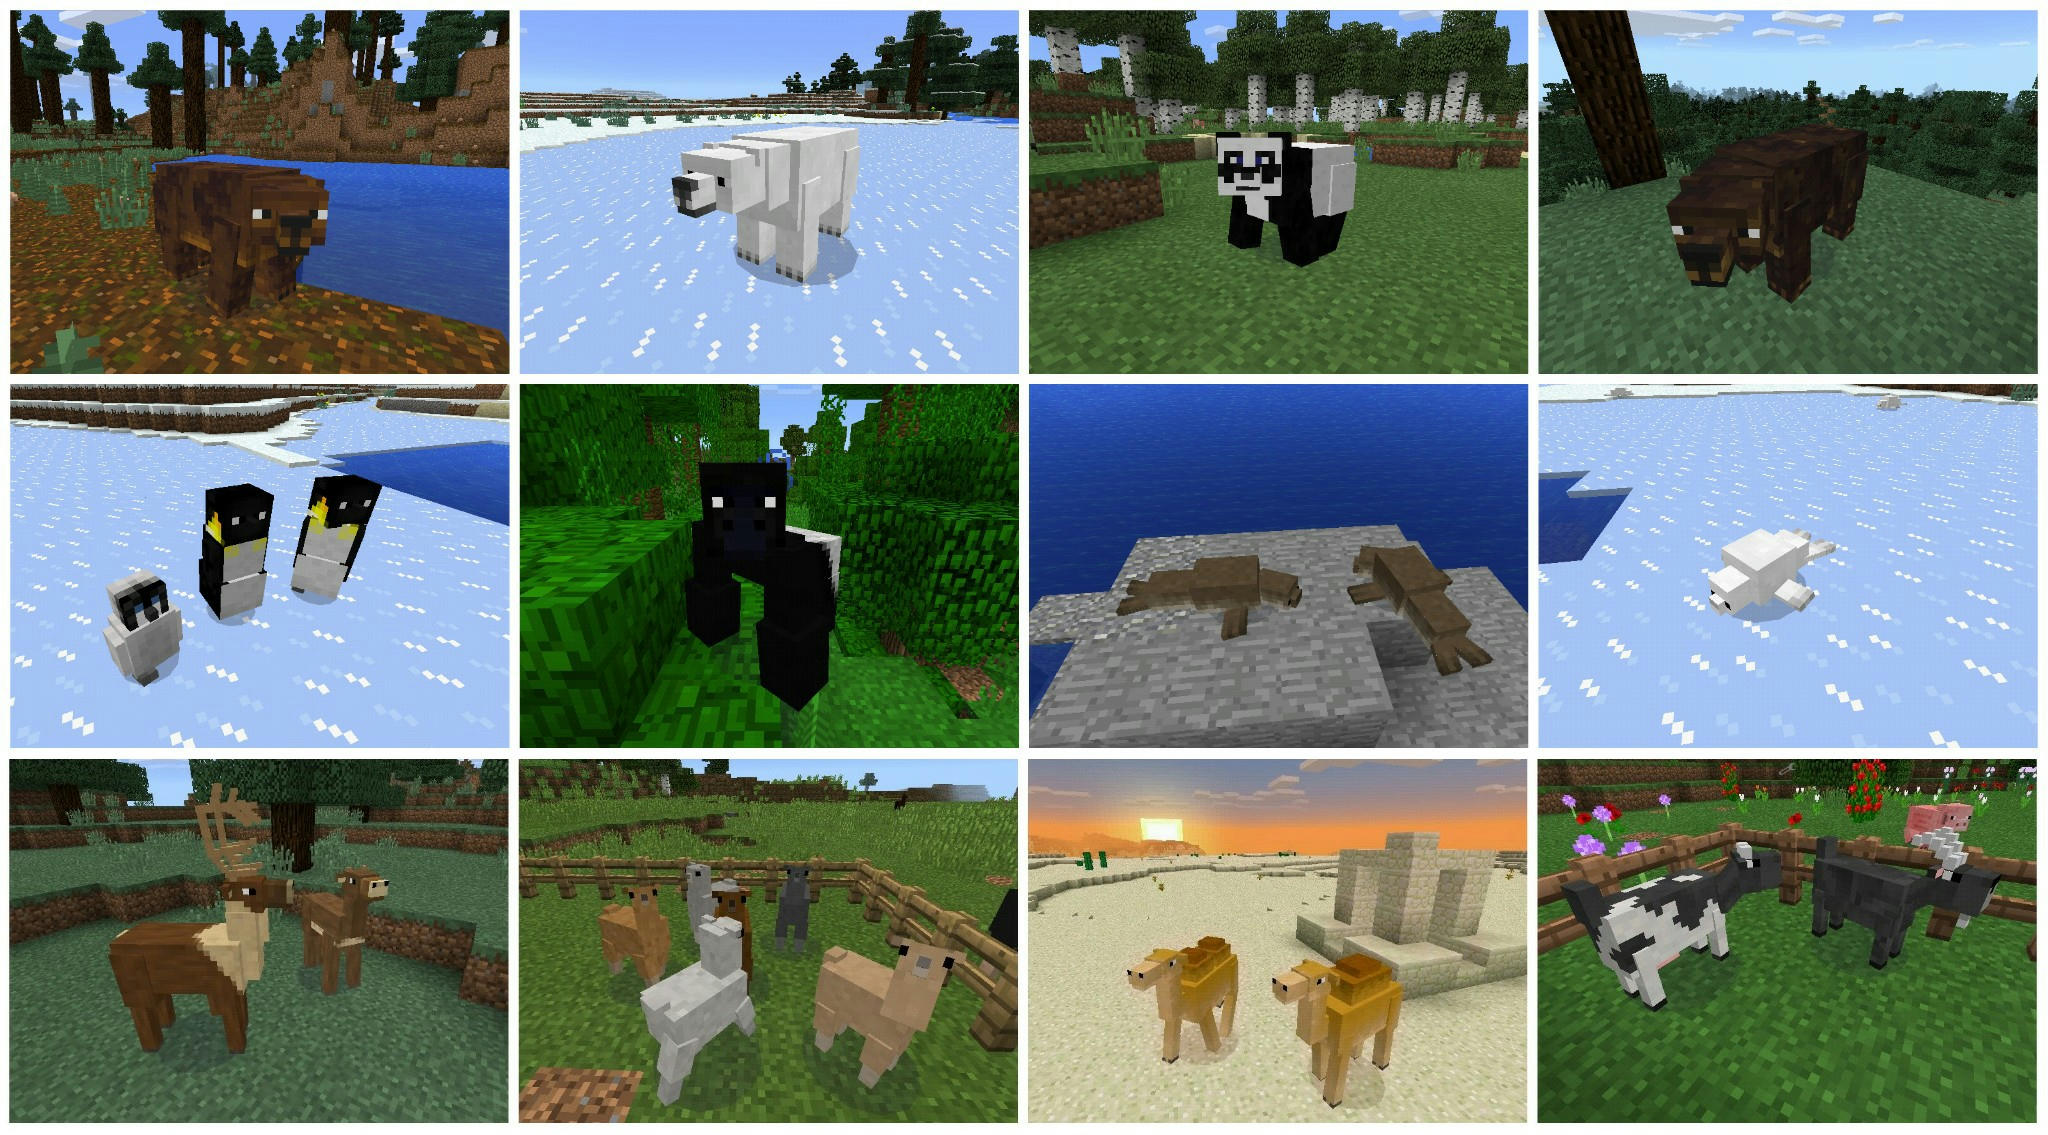 Pocket Creatures MC:PE  / ! Elephants, Lions, Ostriches,  Sharks.. Over 50 animals! - MCPE: Mods / Tools - Minecraft: Pocket Edition  - Minecraft Forum - Minecraft Forum